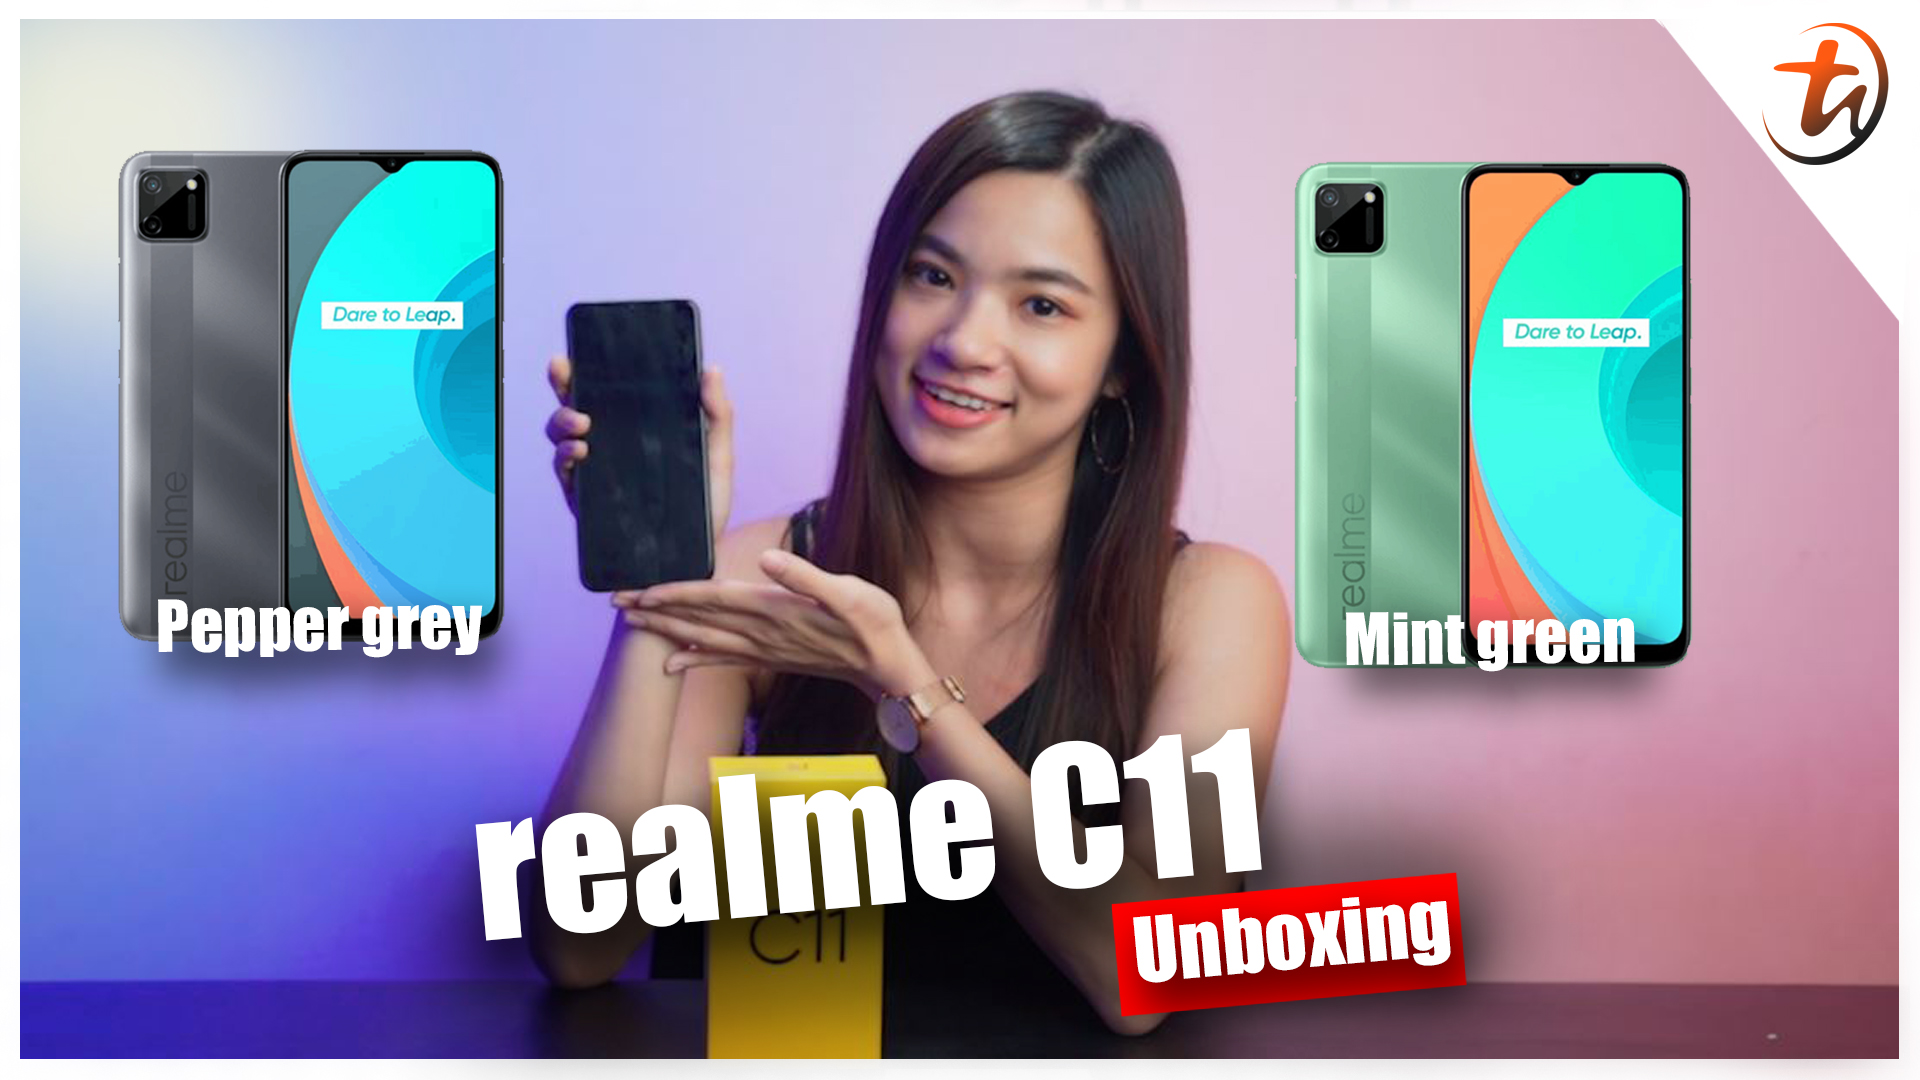 realme C11 Unboxing and Hands-On: MediaTek Helio G35 chipset and a 6.5-inch mini-drop Fullscreen with 720p display!